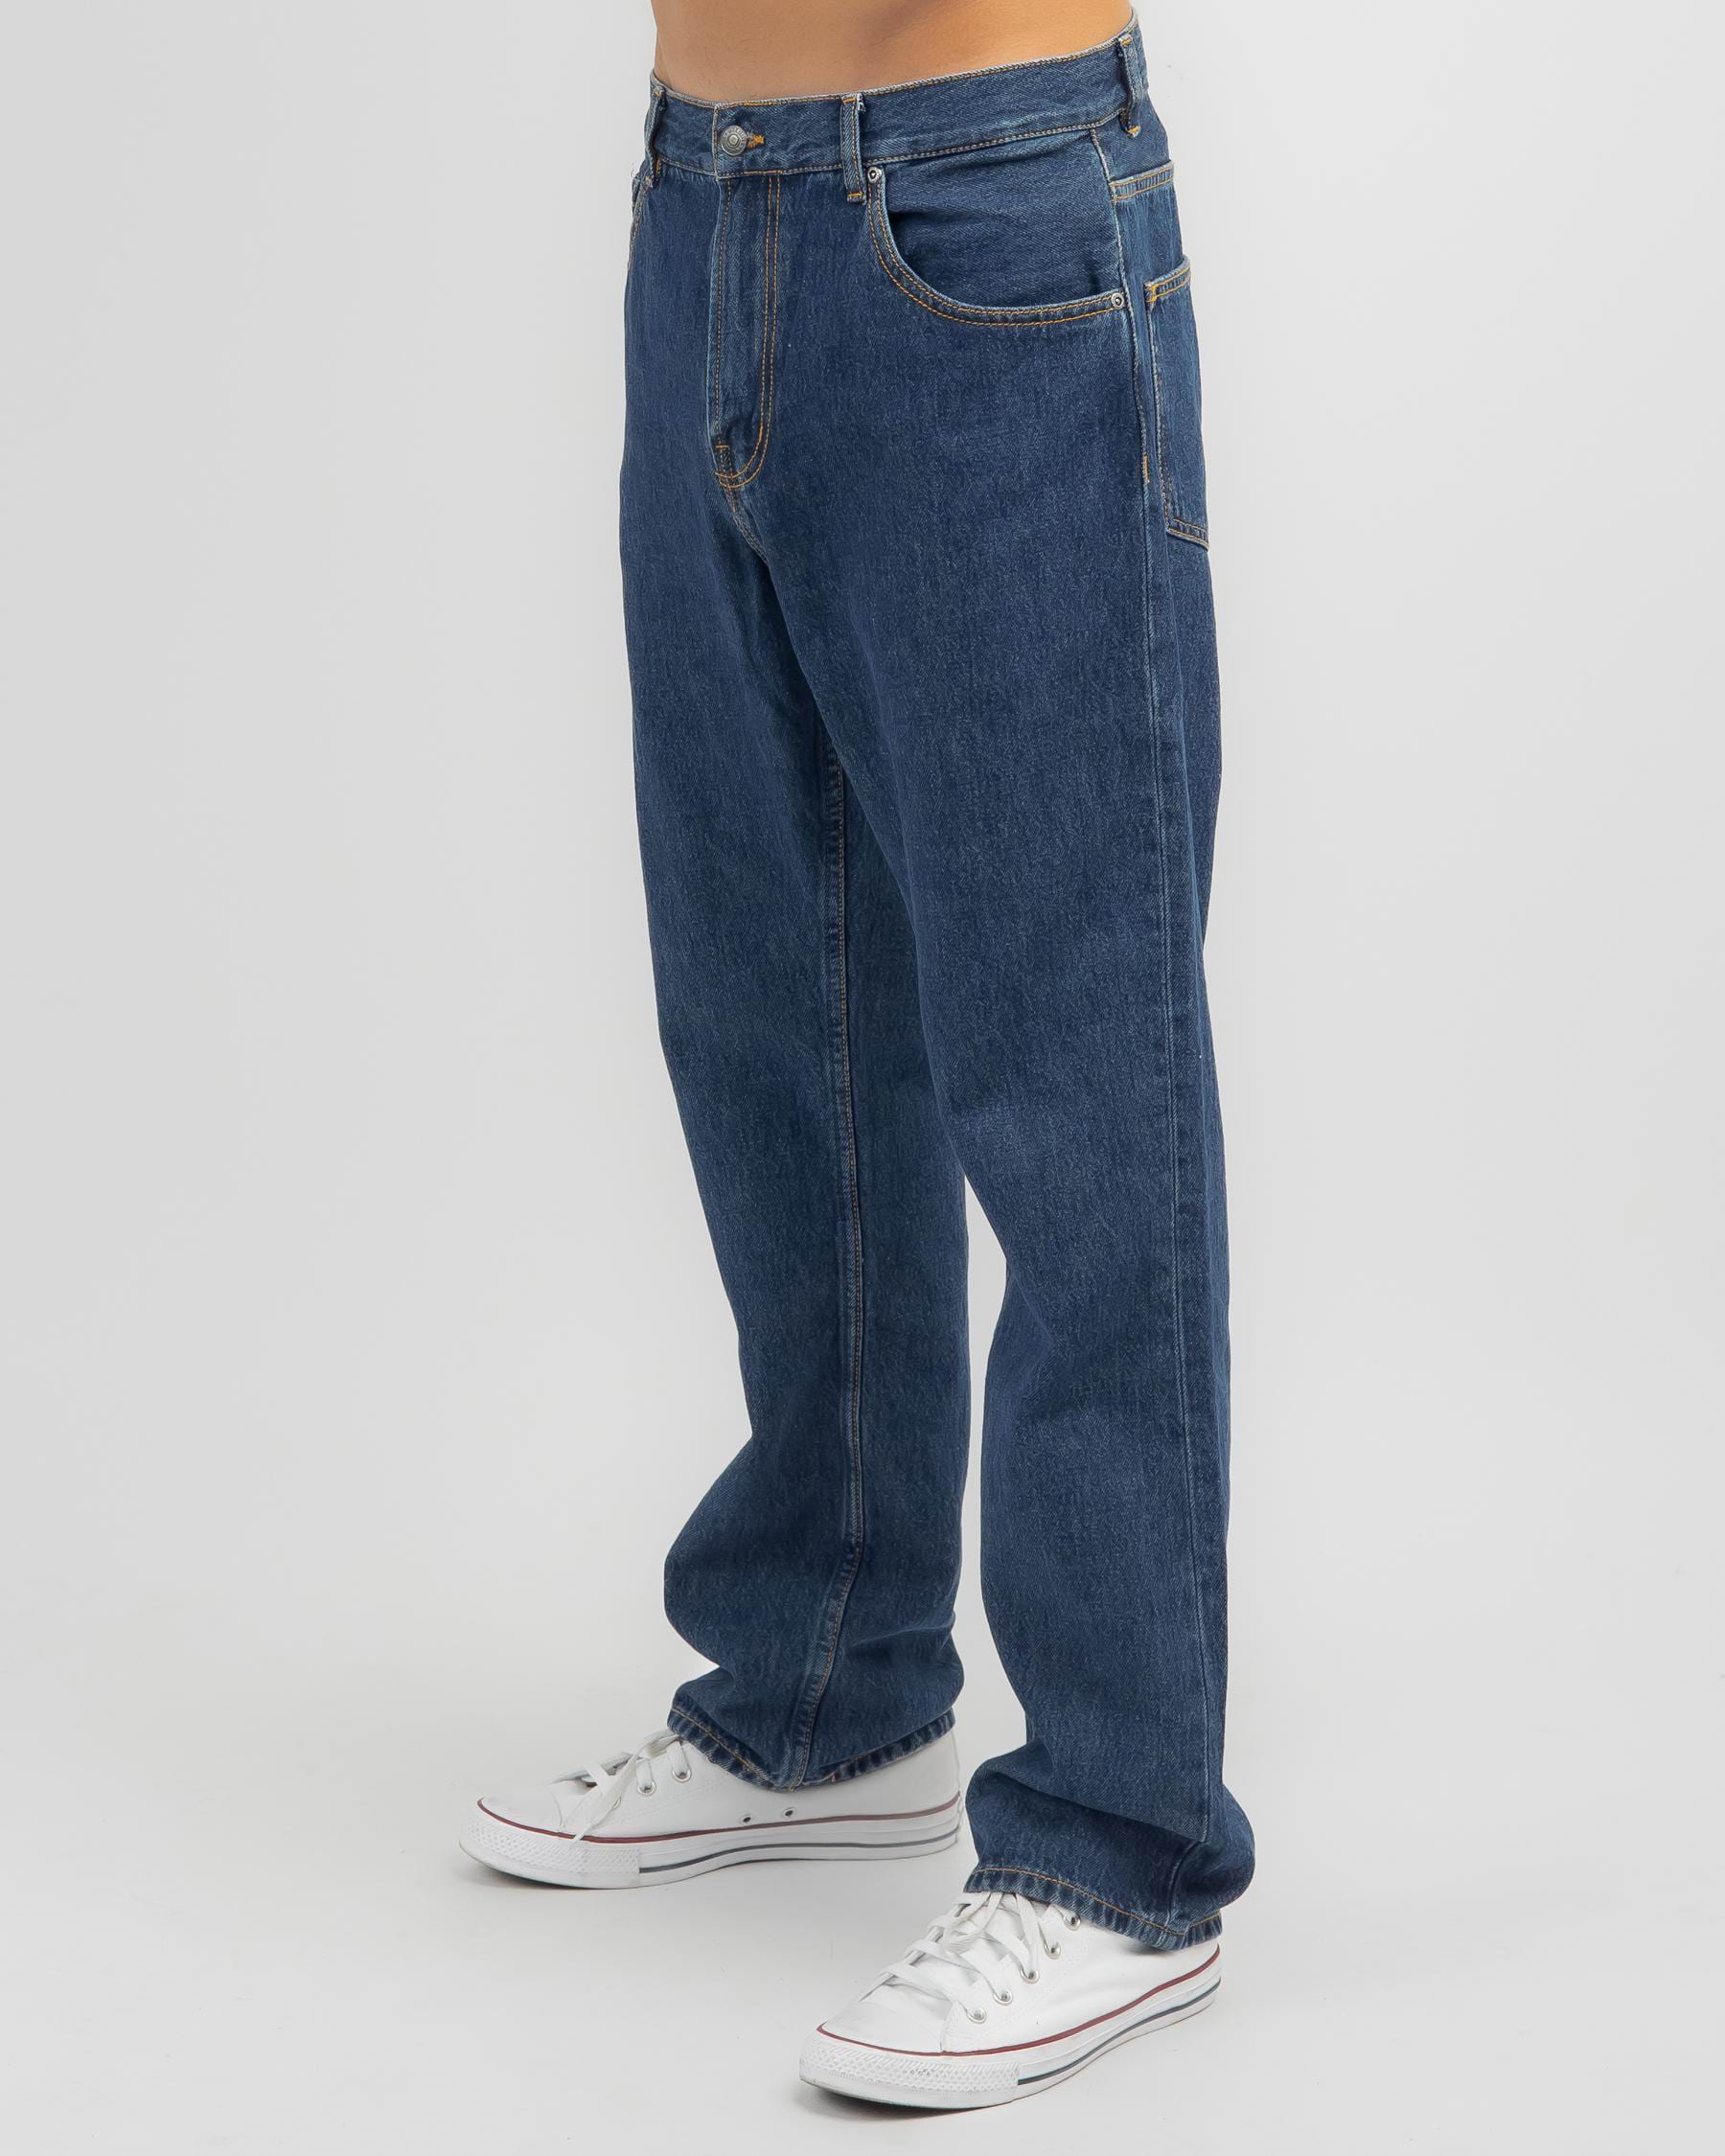 Quiksilver Baggy Nineties Washed Jeans In Ashley Blue - Fast Shipping ...